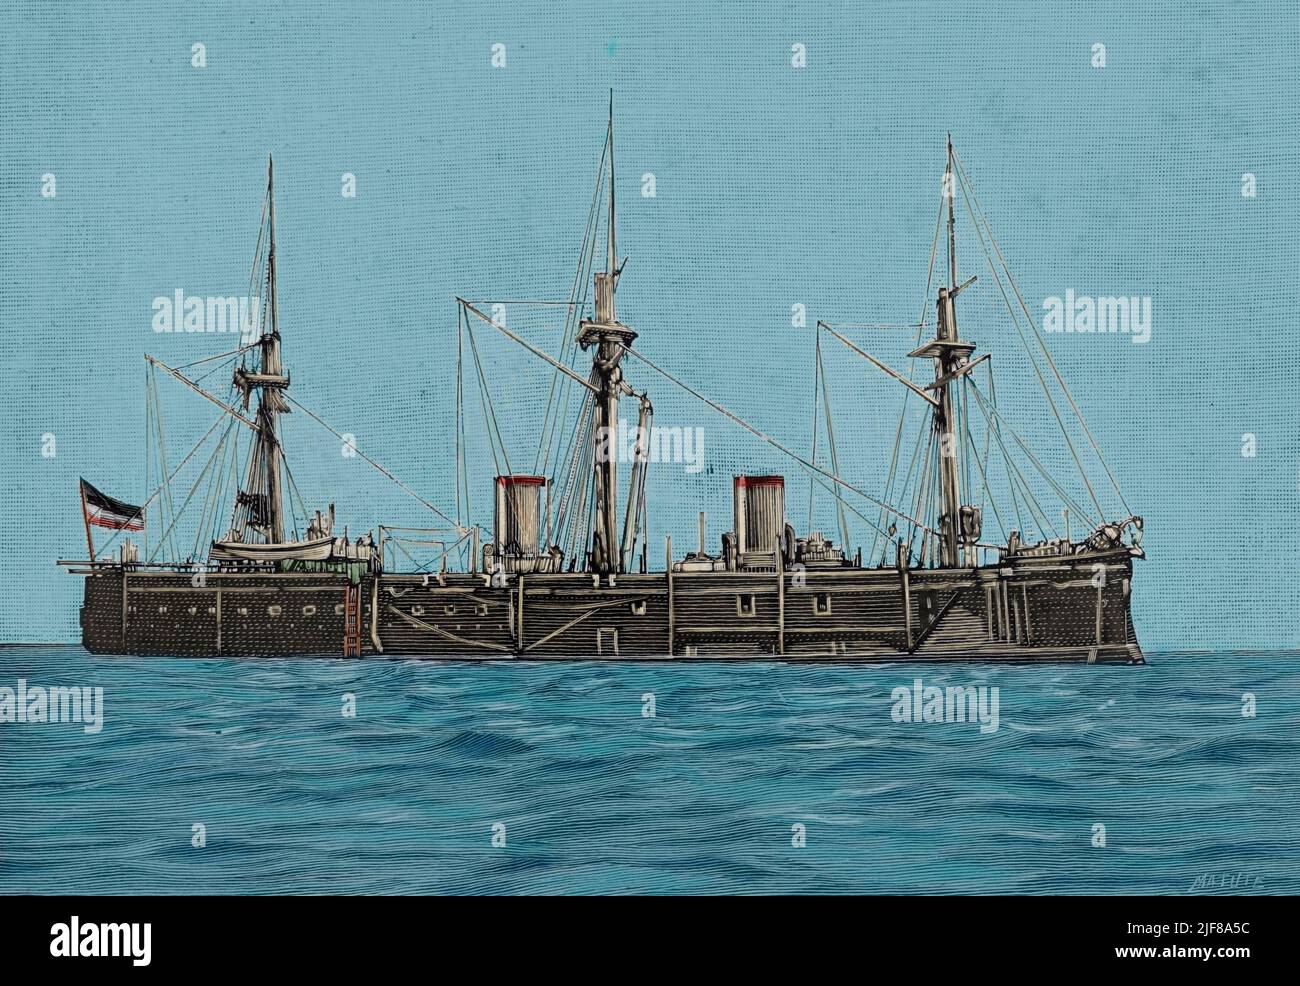 The German East Asia Squadron. China. The Imperial German Navy battleship, Kaiser class, SMS Deutschland (1875-1904). It was assigned to the East Asia Squadron for three years. Engraving by Matute. Later colouration. La Ilustración Española y Americana, 1898. Stock Photo